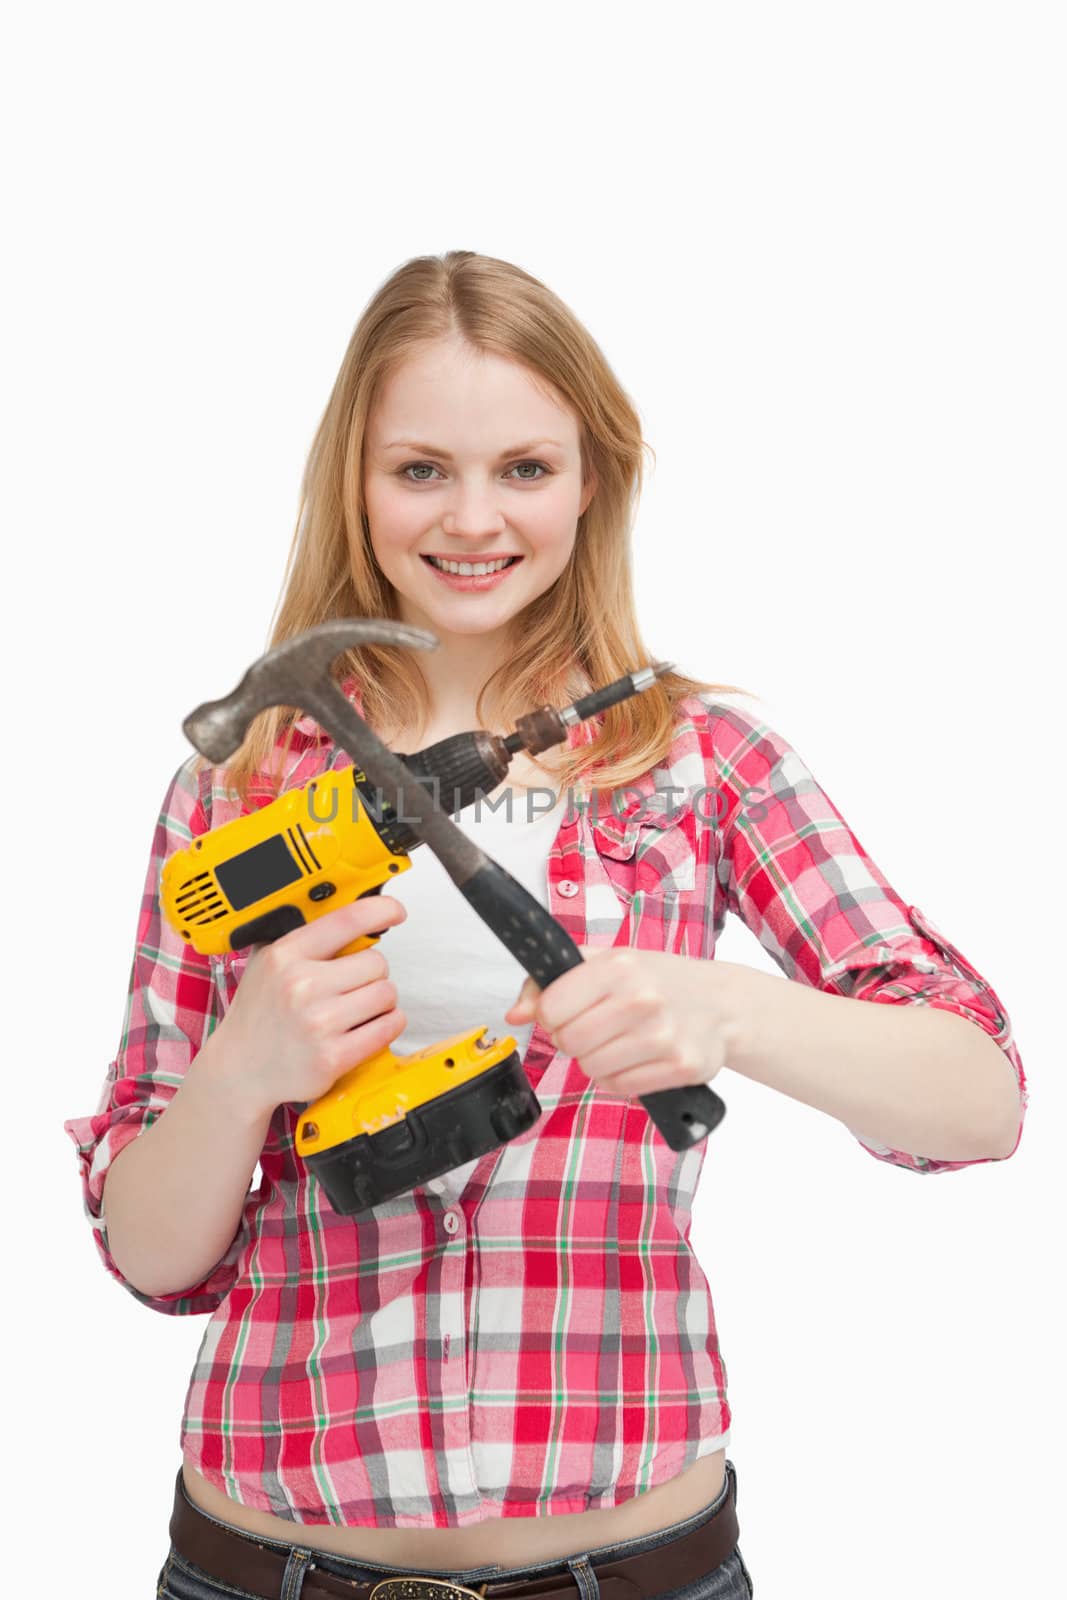 Young woman holding tools against white background